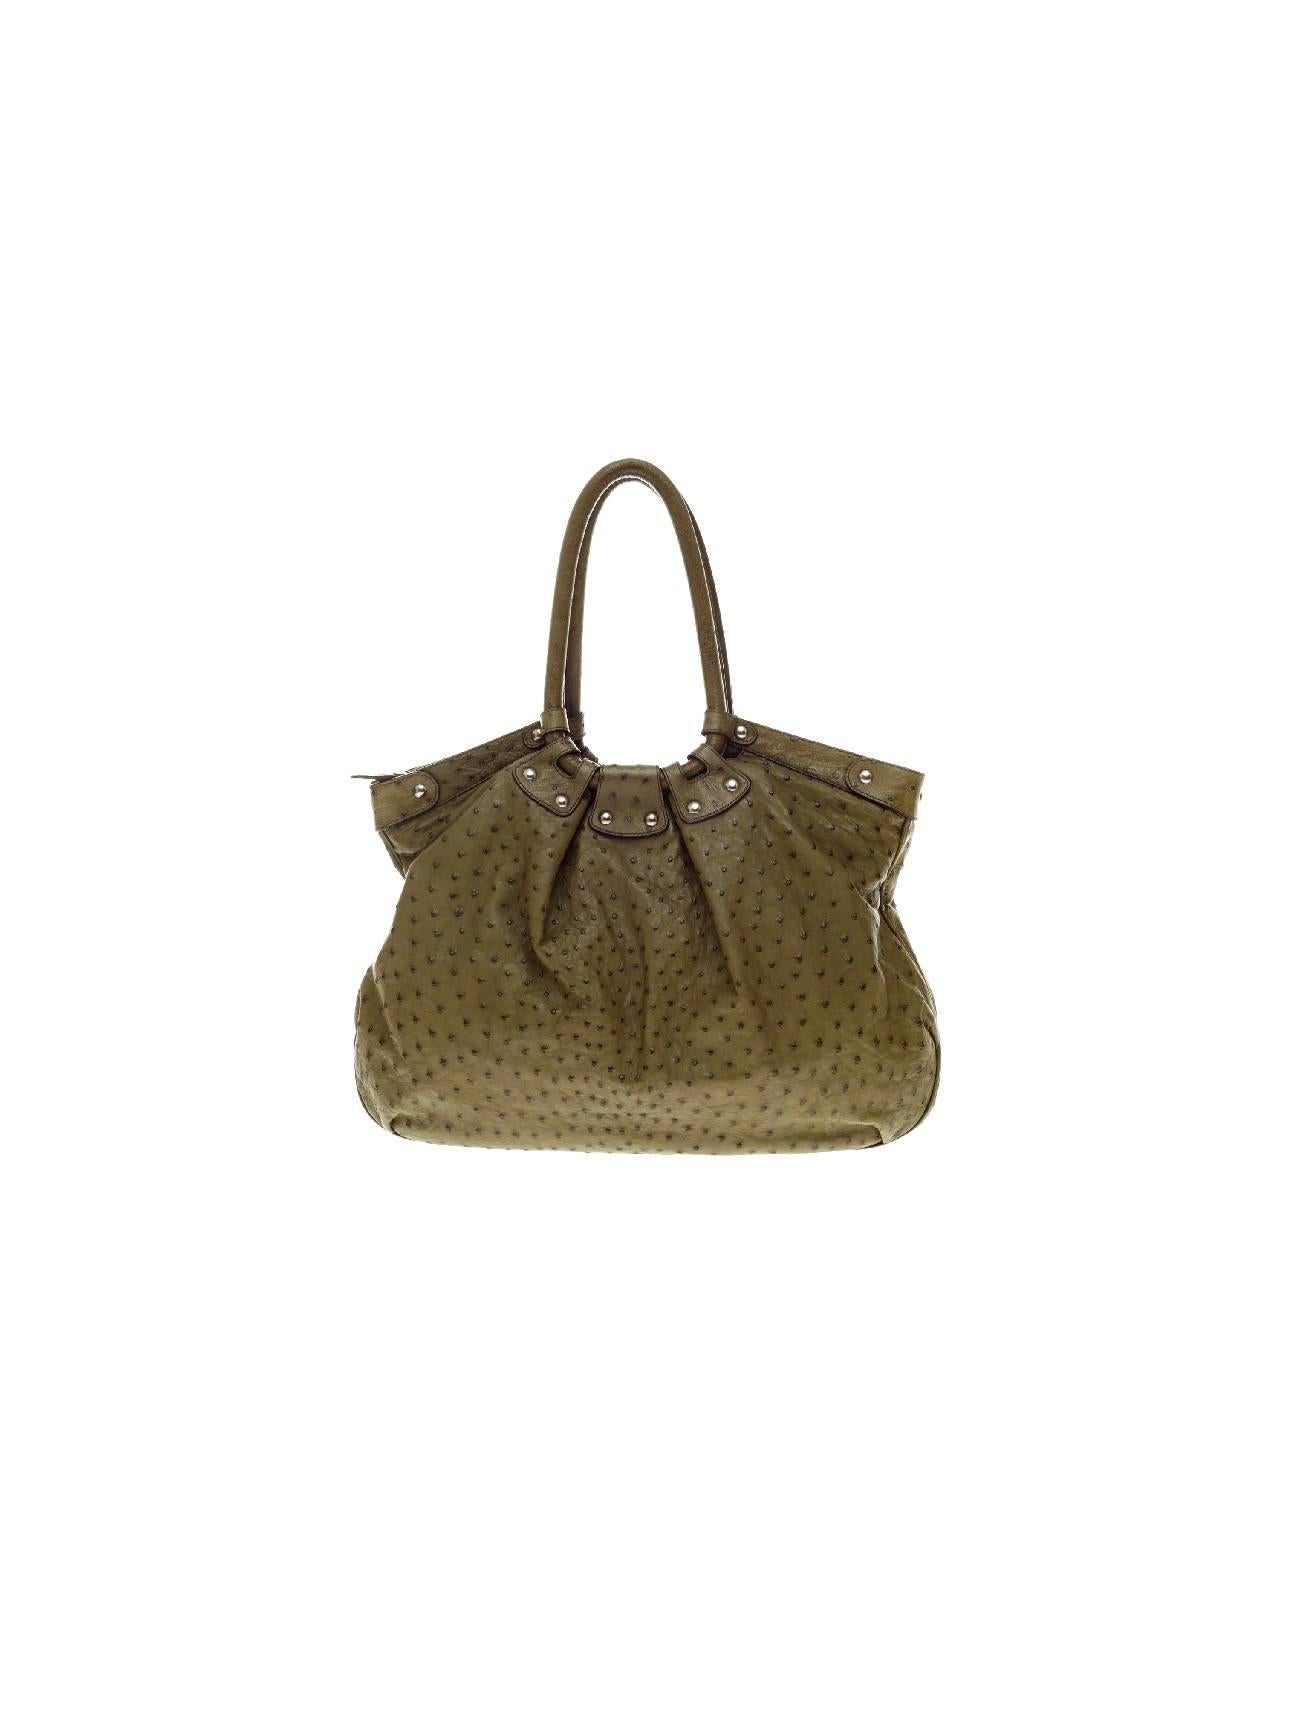 Stunning Real Ostrich Skin Shoulder Bag by Salvatore Ferragamo - a timeless classic!

Made of finest ostrich skin
Olive green color
Fully lined with chocolate brown suede leather
One inner bag with zip closure, three open inner bags for phone